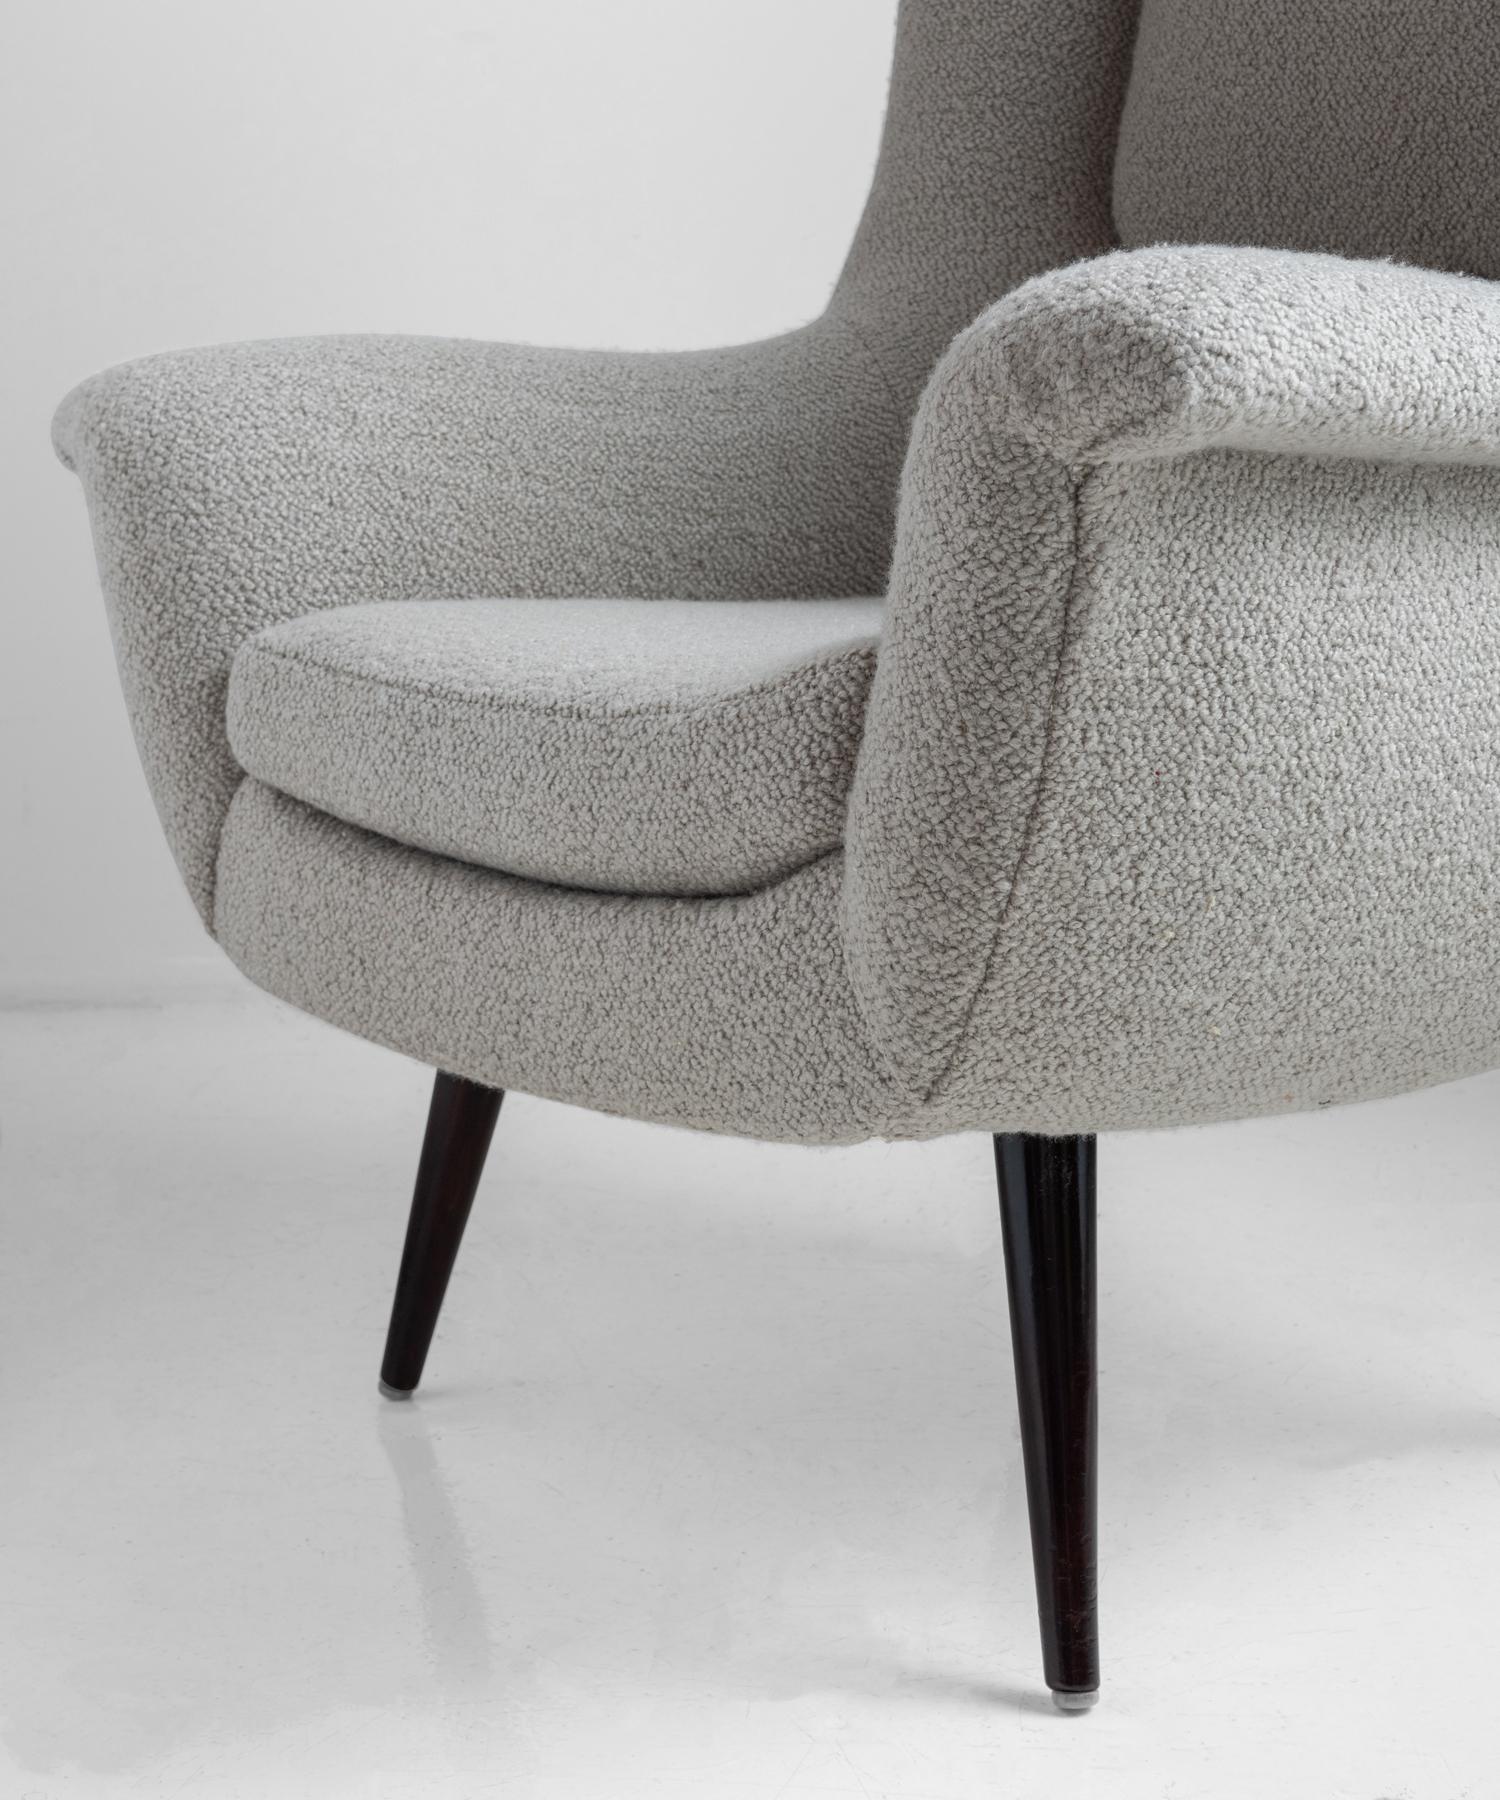 American Lounge Chair and Ottoman by Lawrence Peabody in a Belgian Textured Wool Blend